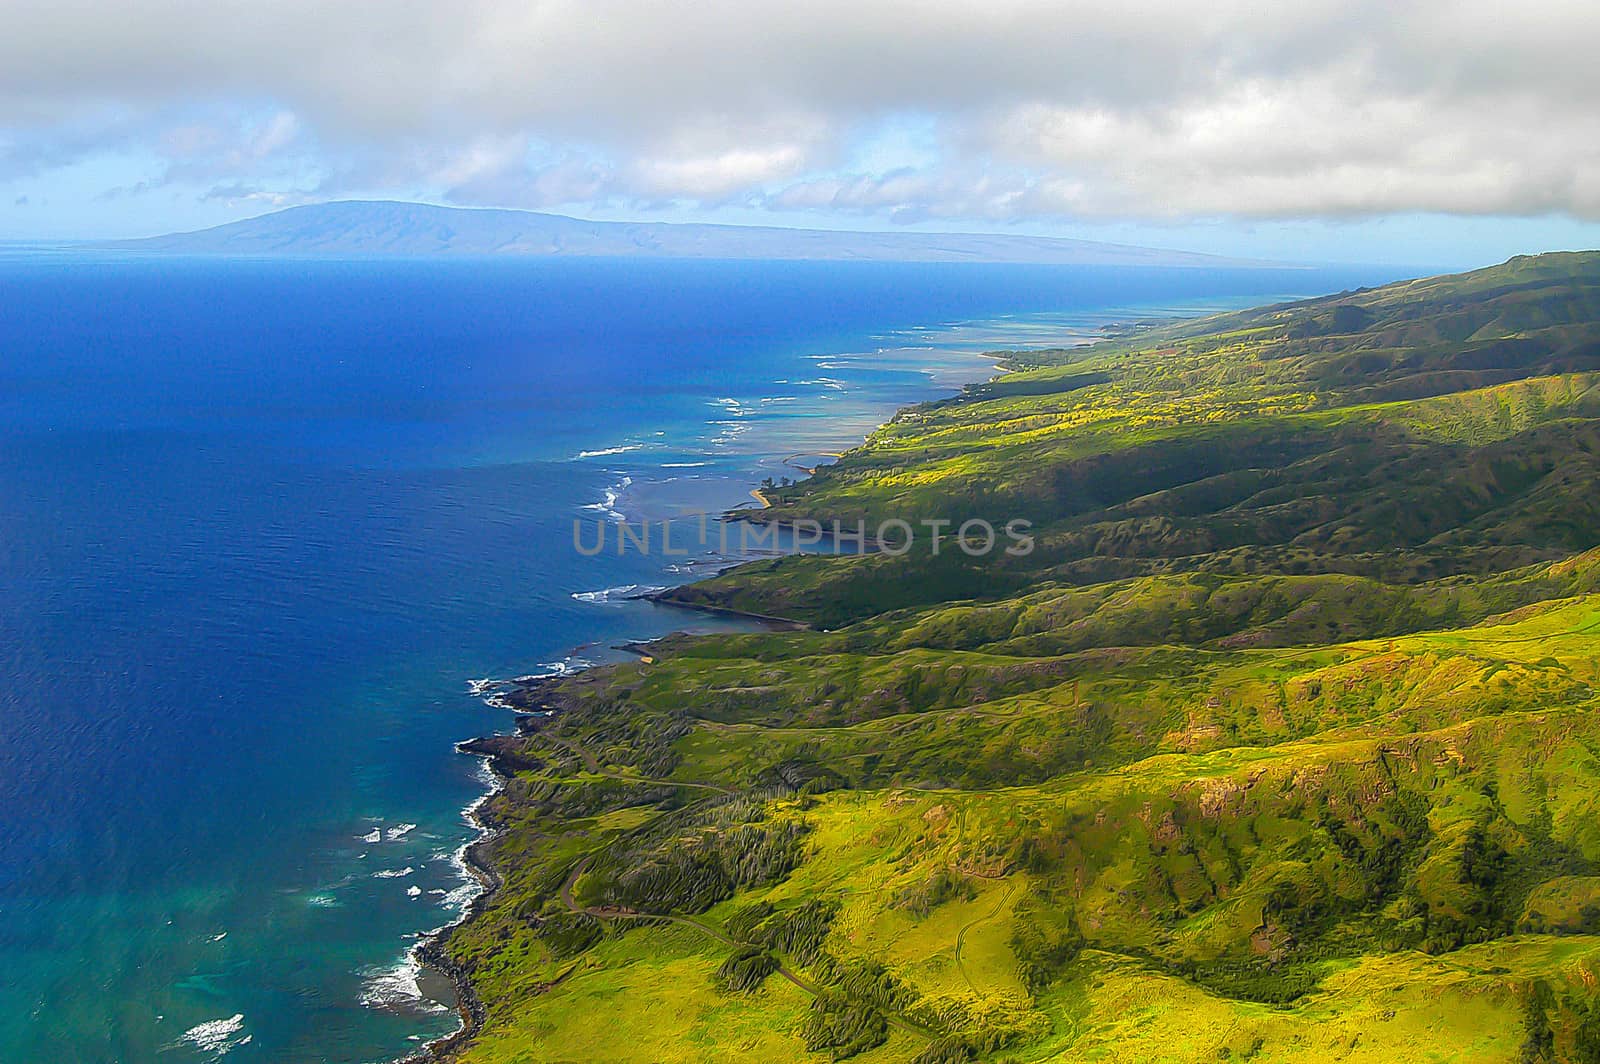 Scene from Helicopter over Maui' rain forest